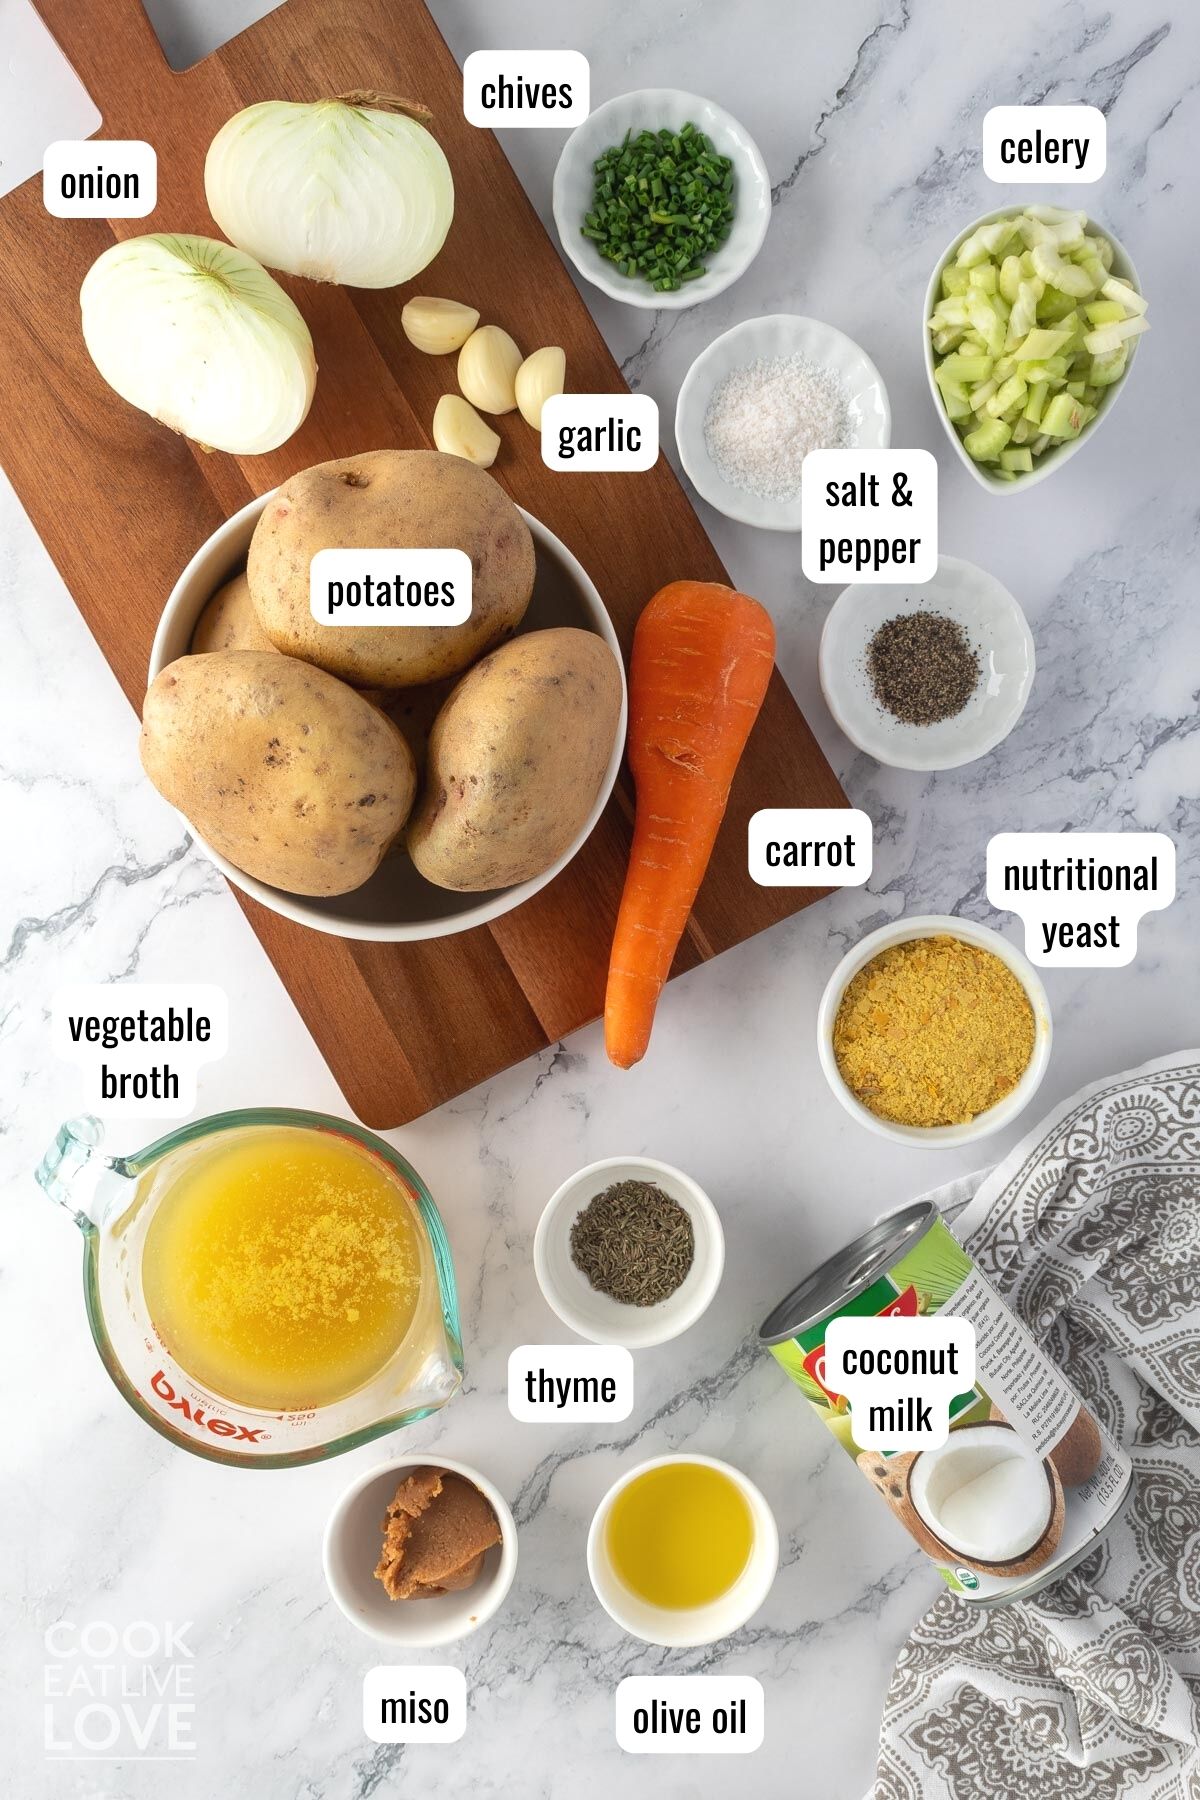 Ingredients to make creamy vegan potato soup with text labels.